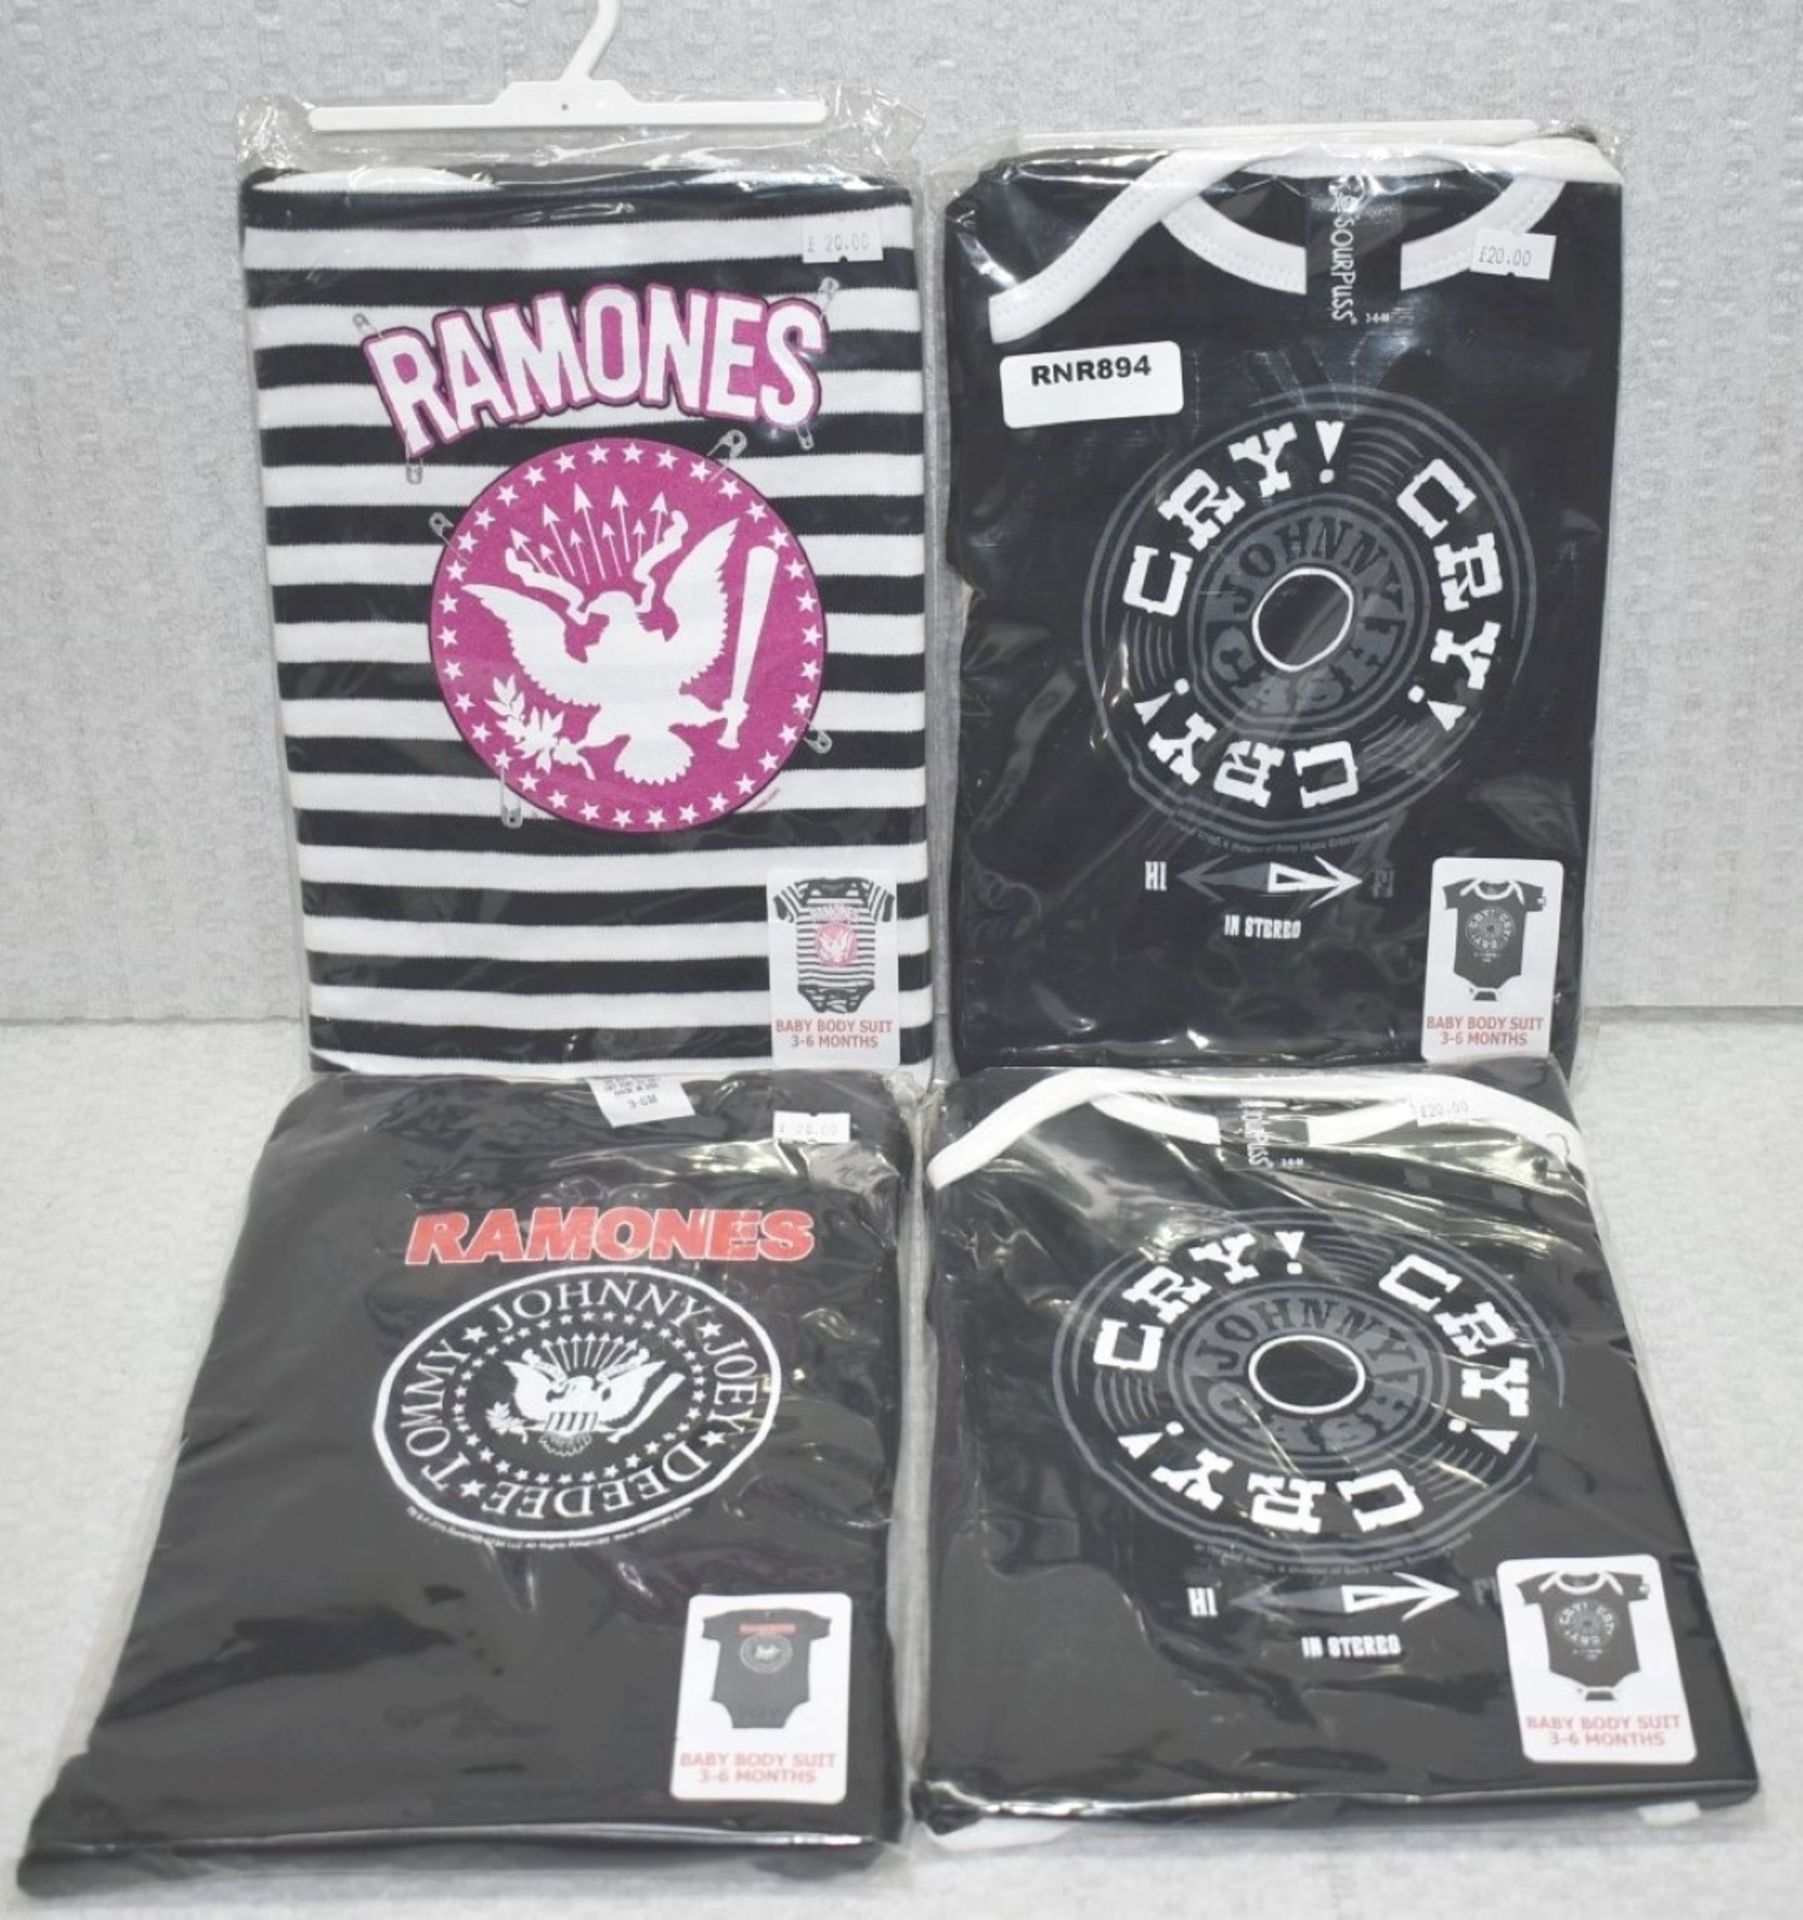 4 x Assorted Baby Body Suits - Features Johnny Cash and the Ramones - Size: 3 to 6 Months -